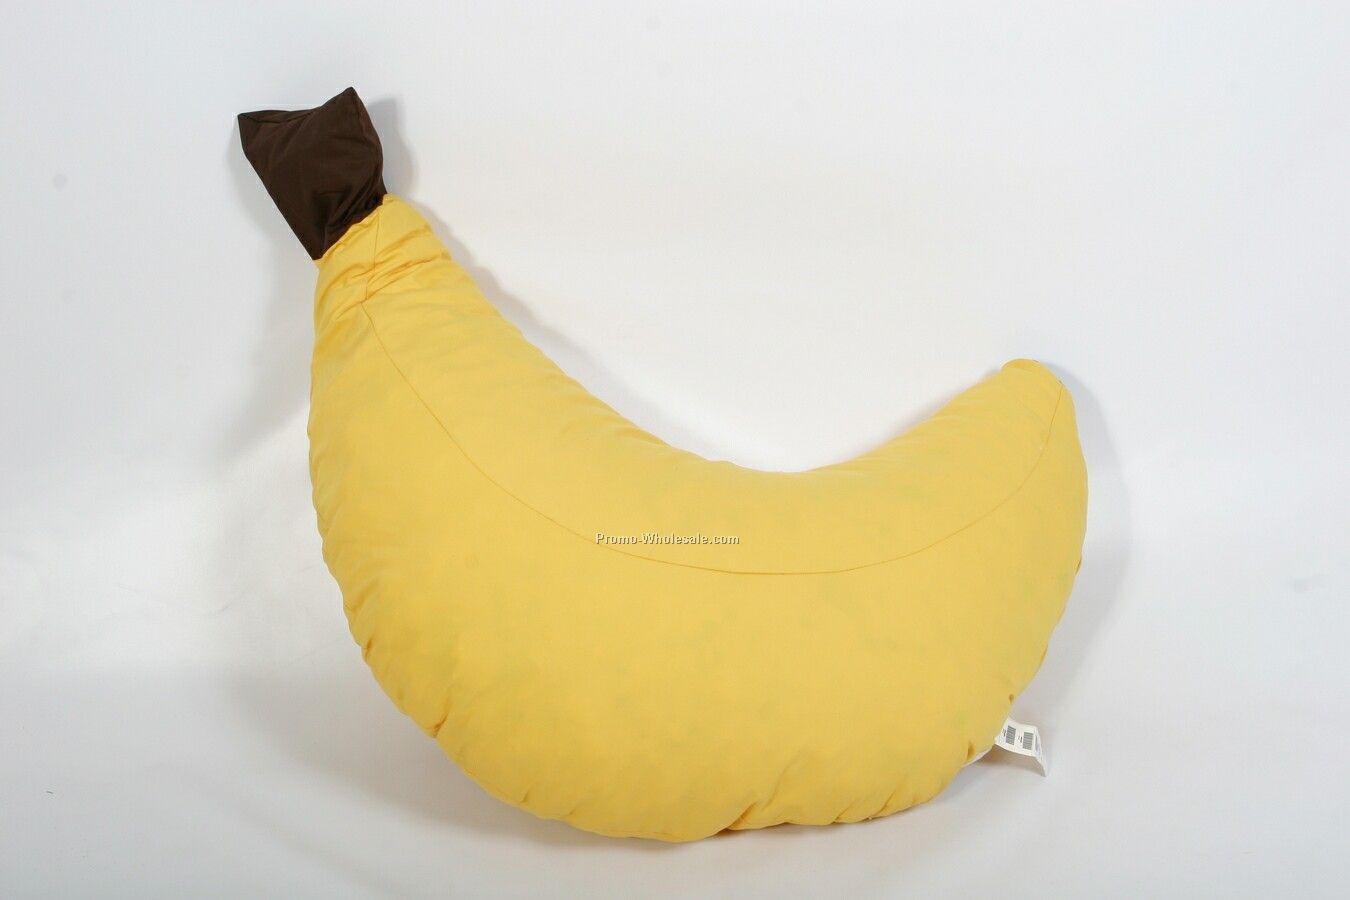 Fruit Collection Banana-shaped Fiber Filled Pillow (Embroidered)